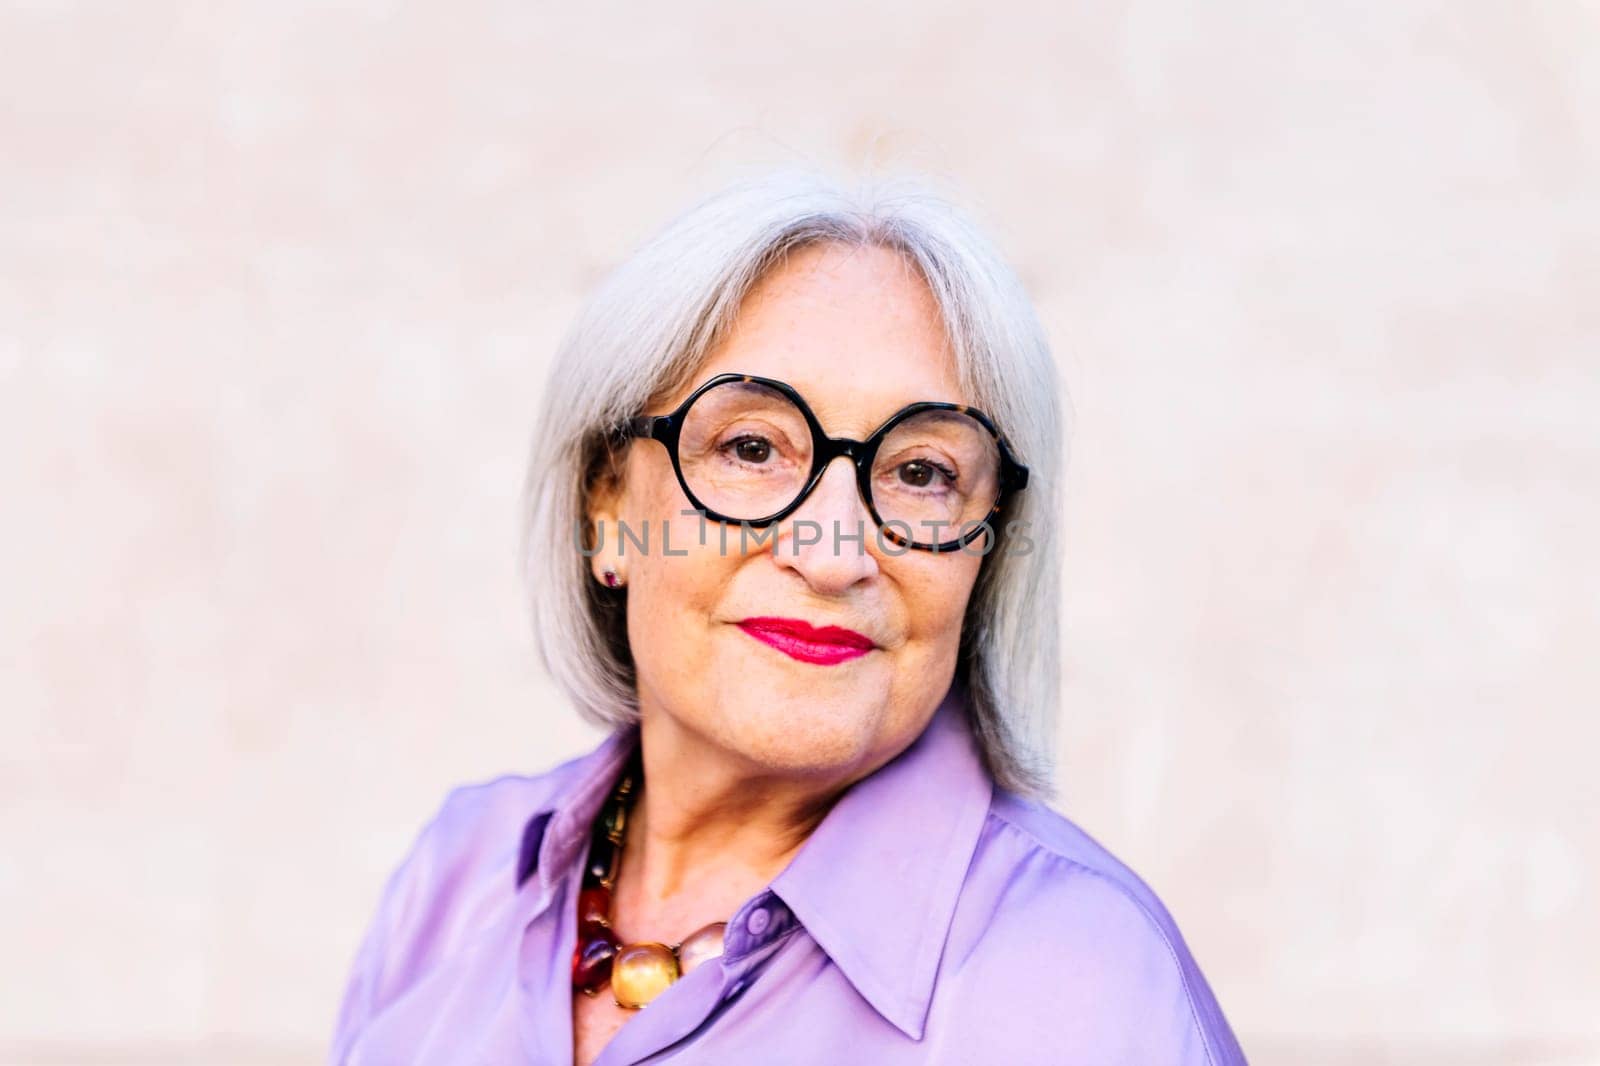 portrait of nice senior woman in glasses smiling looking at camera, concept of happiness of elderly people and active lifestyle, copy space for text